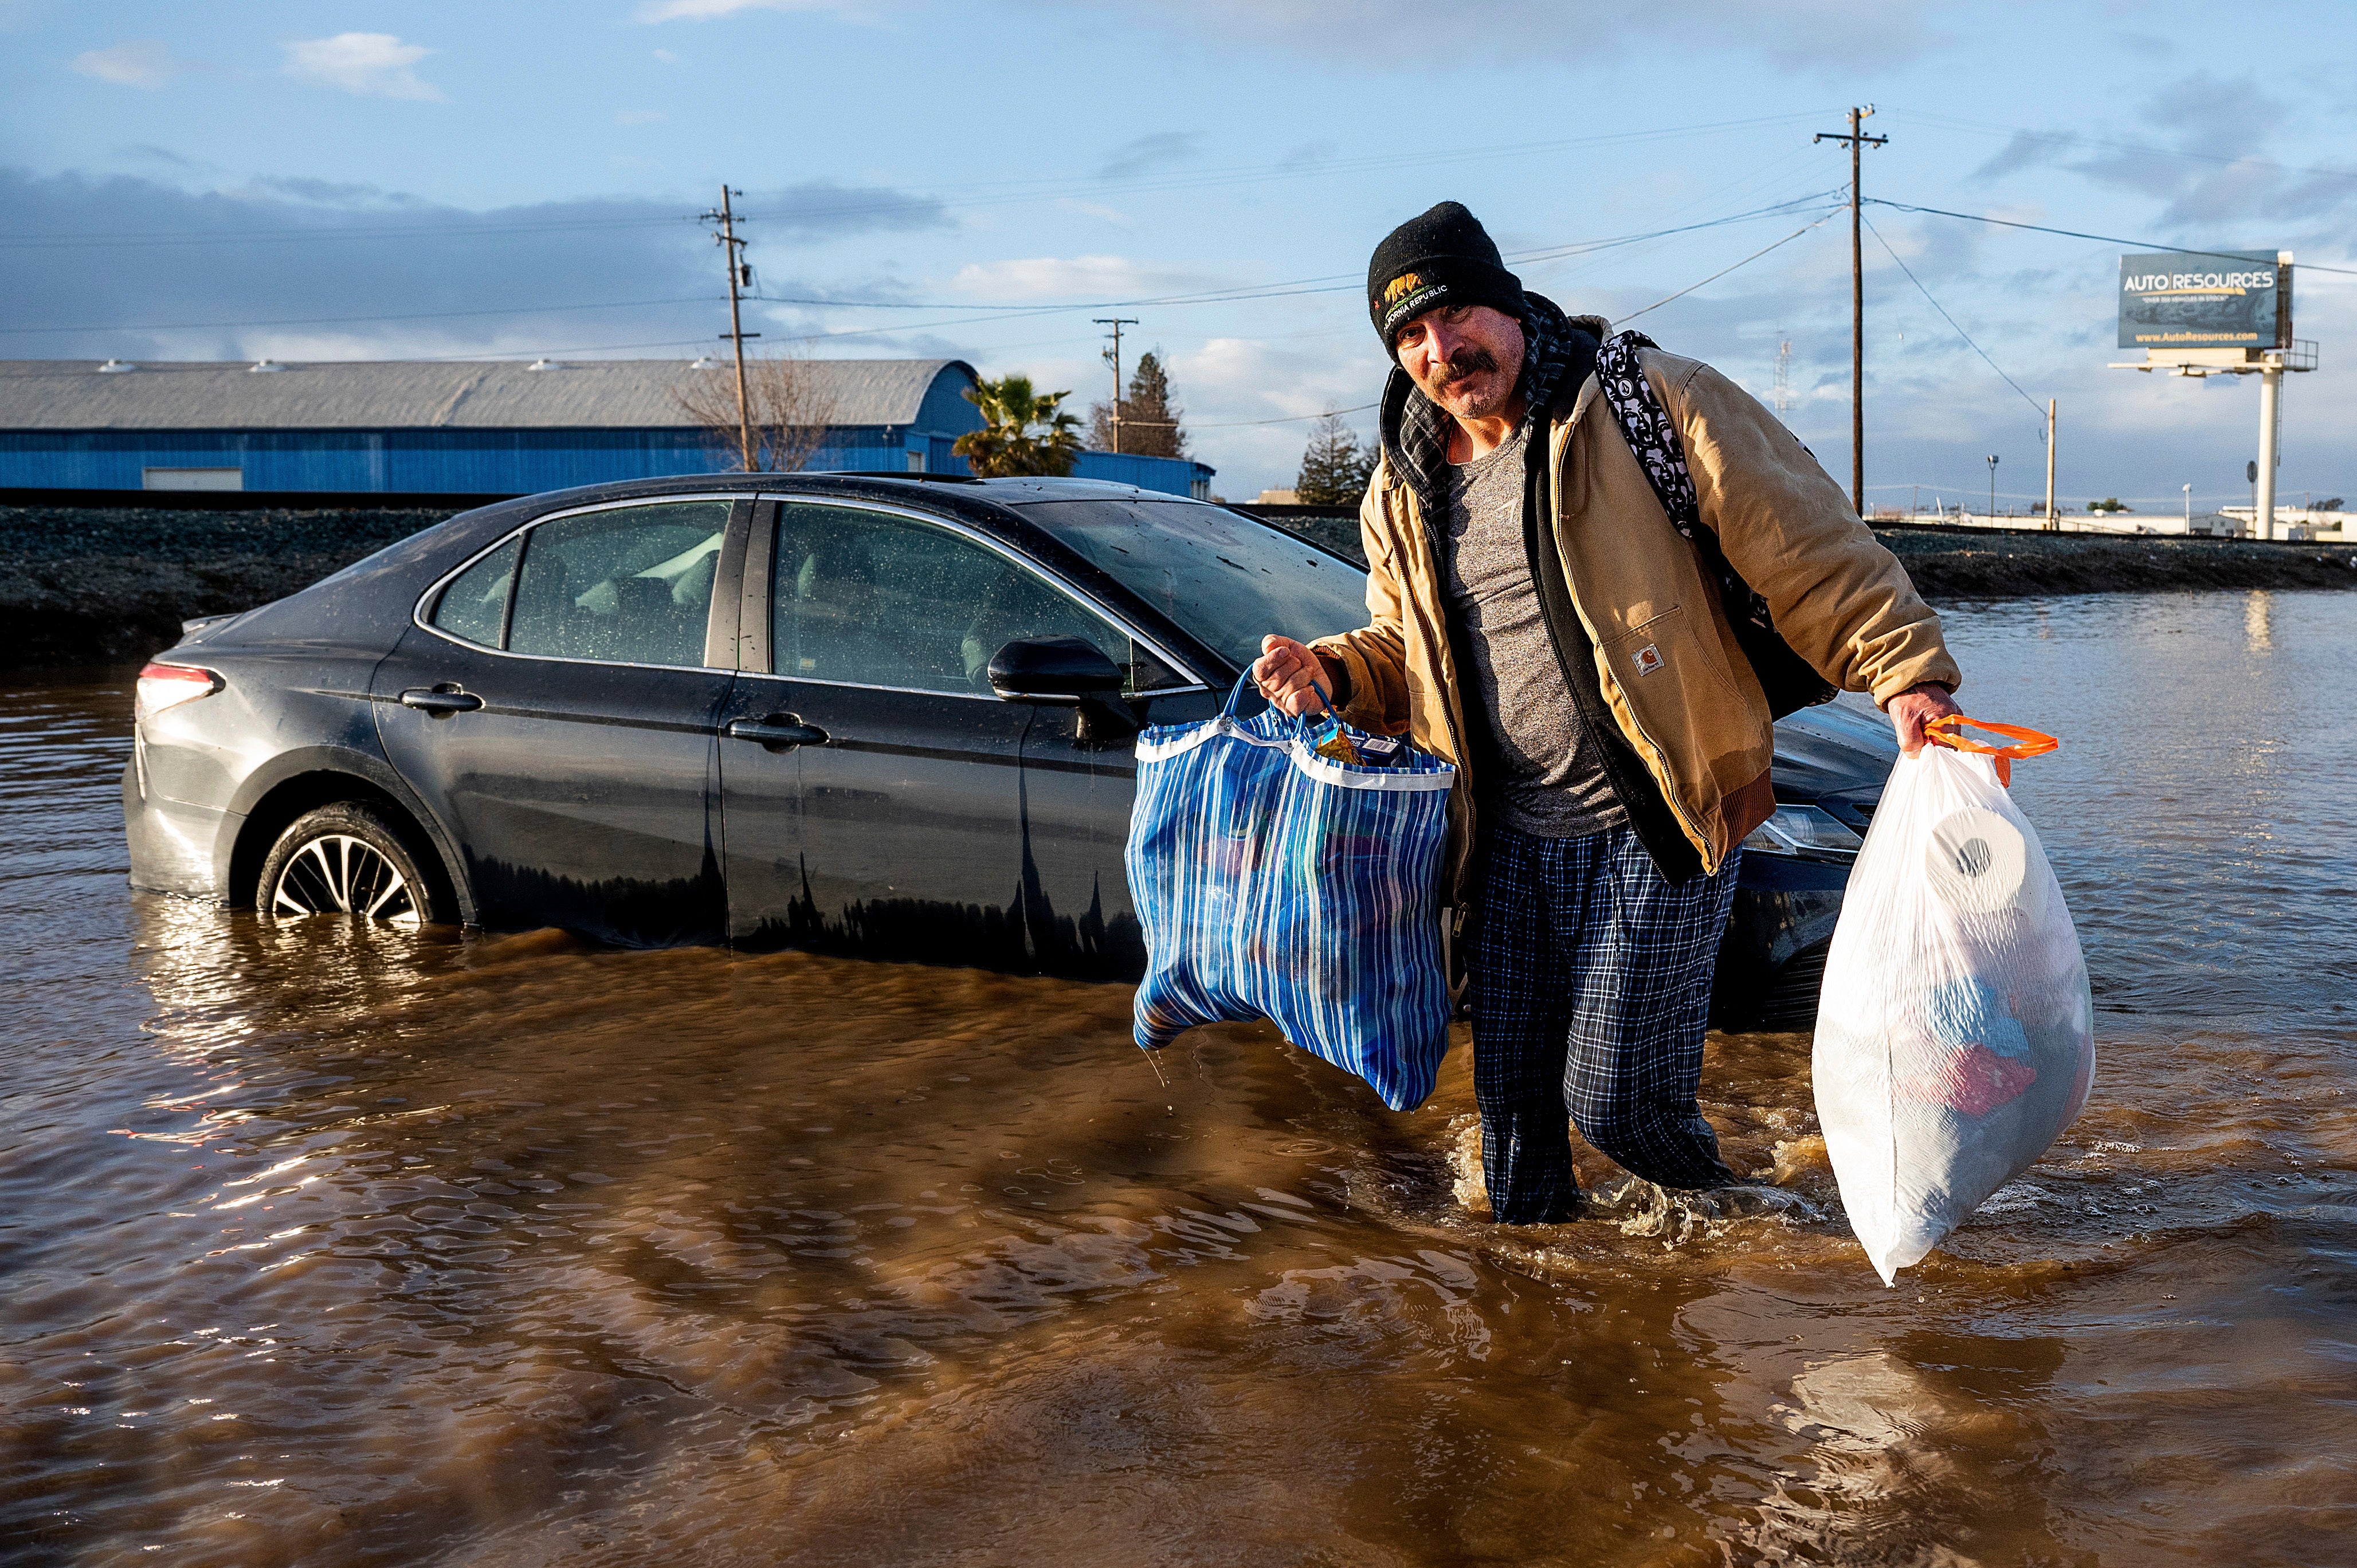  Jesus Torres, whose home in Merced flooded, carries his belongings on Tuesday, January 10. (Photo: Noah Berger, AP)